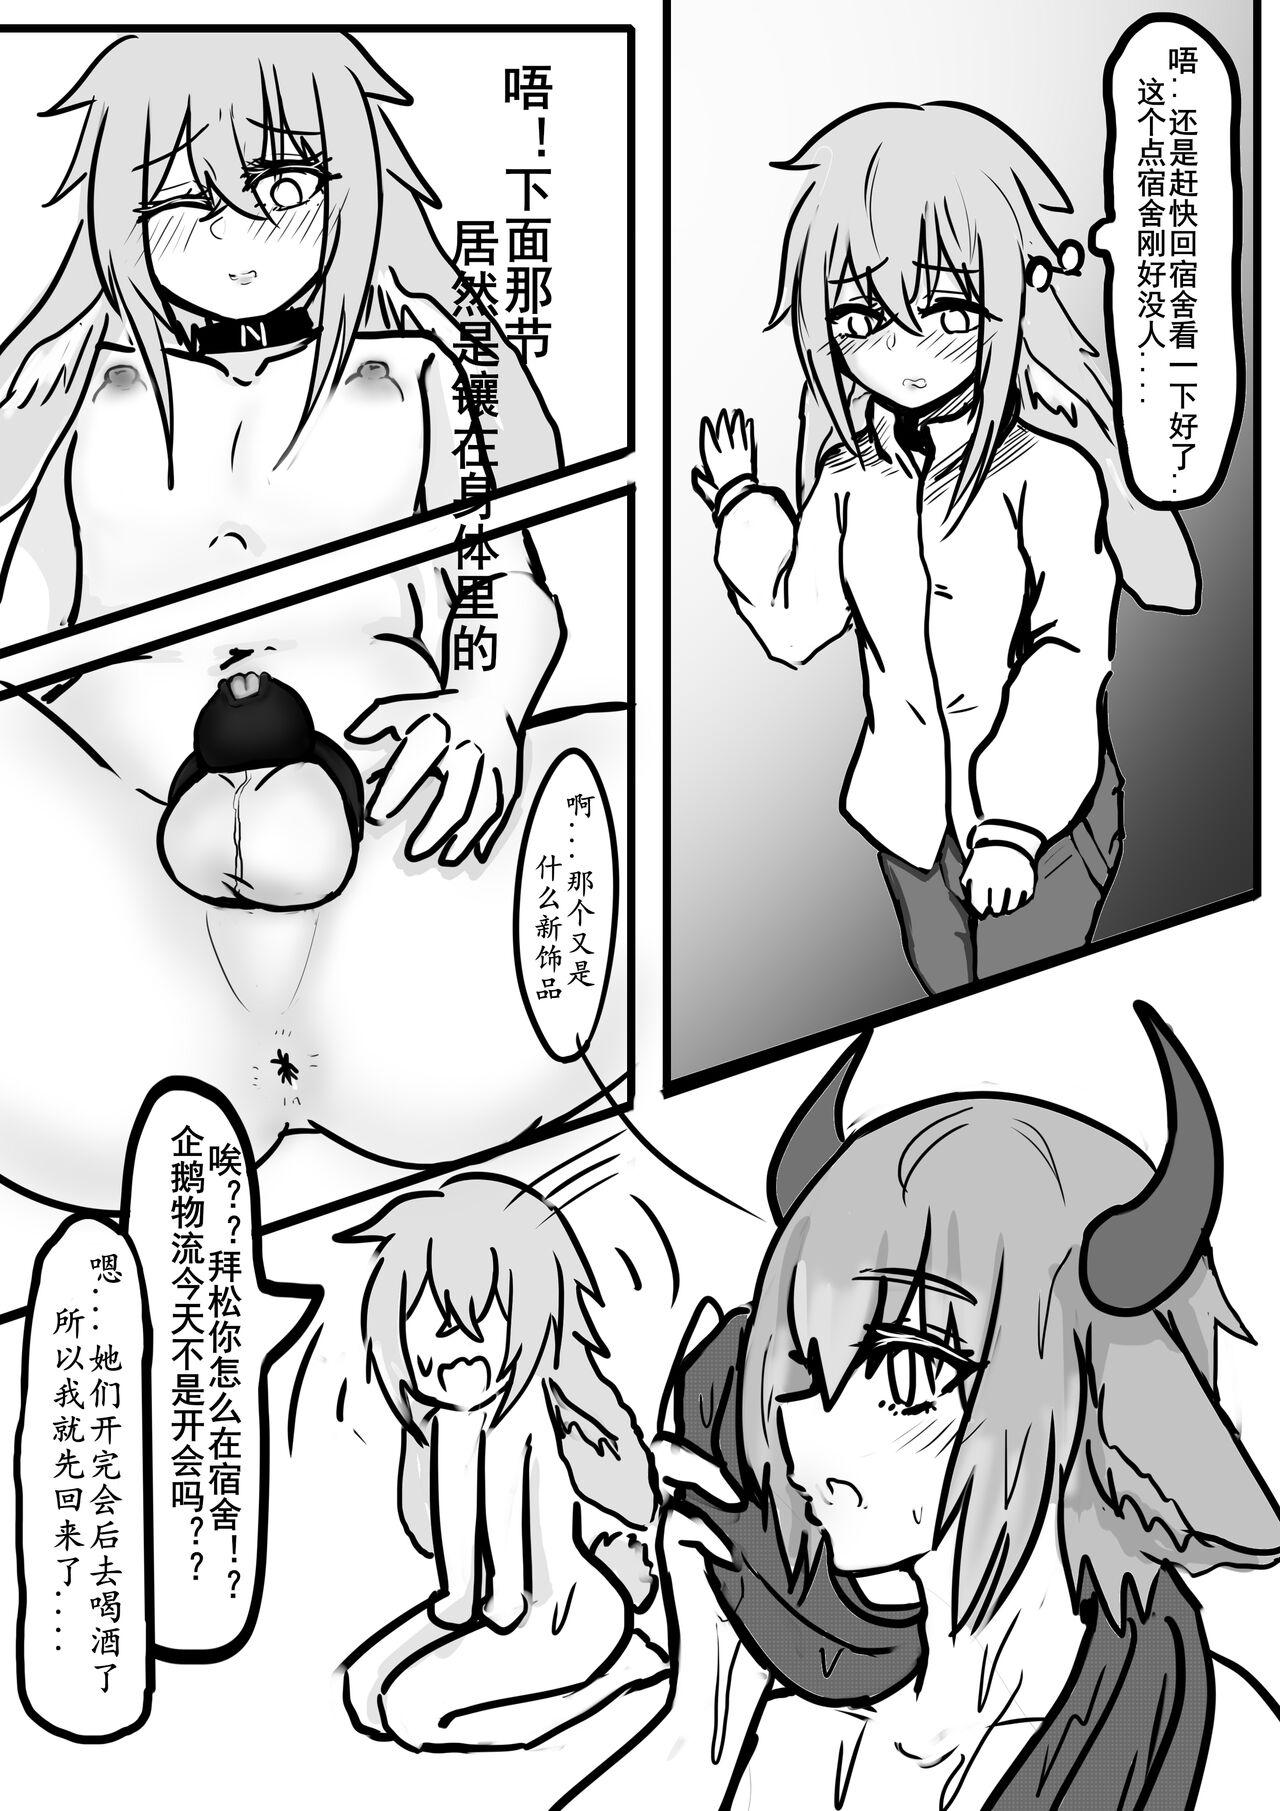 Cheerleader Special services of Ansel Ⅲ - Arknights Footjob - Page 7